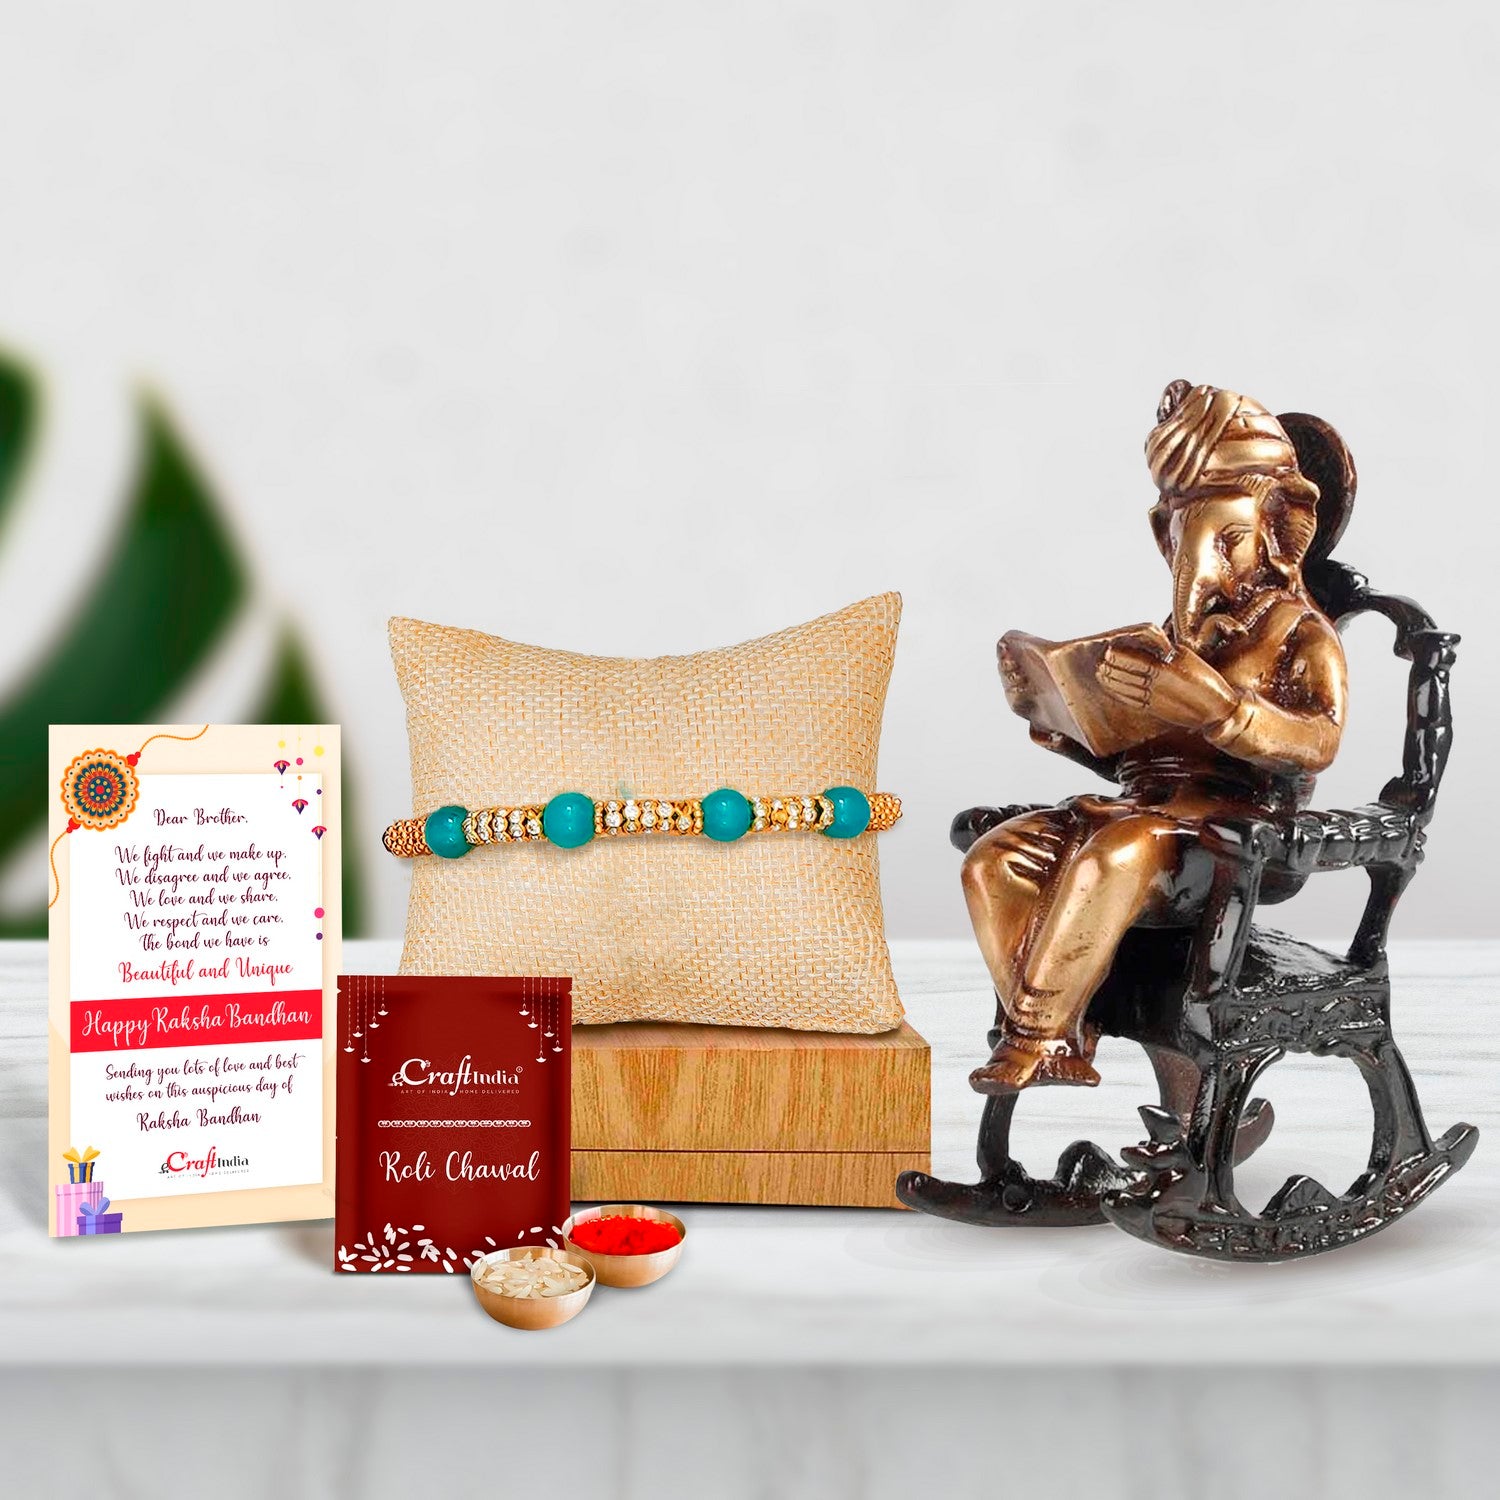 Designer Pearl Rakhi with Brass Lord Ganesha on Rocking Chair Antique Showpiece and Roli Chawal Pack, Best Wishes Greeting Card